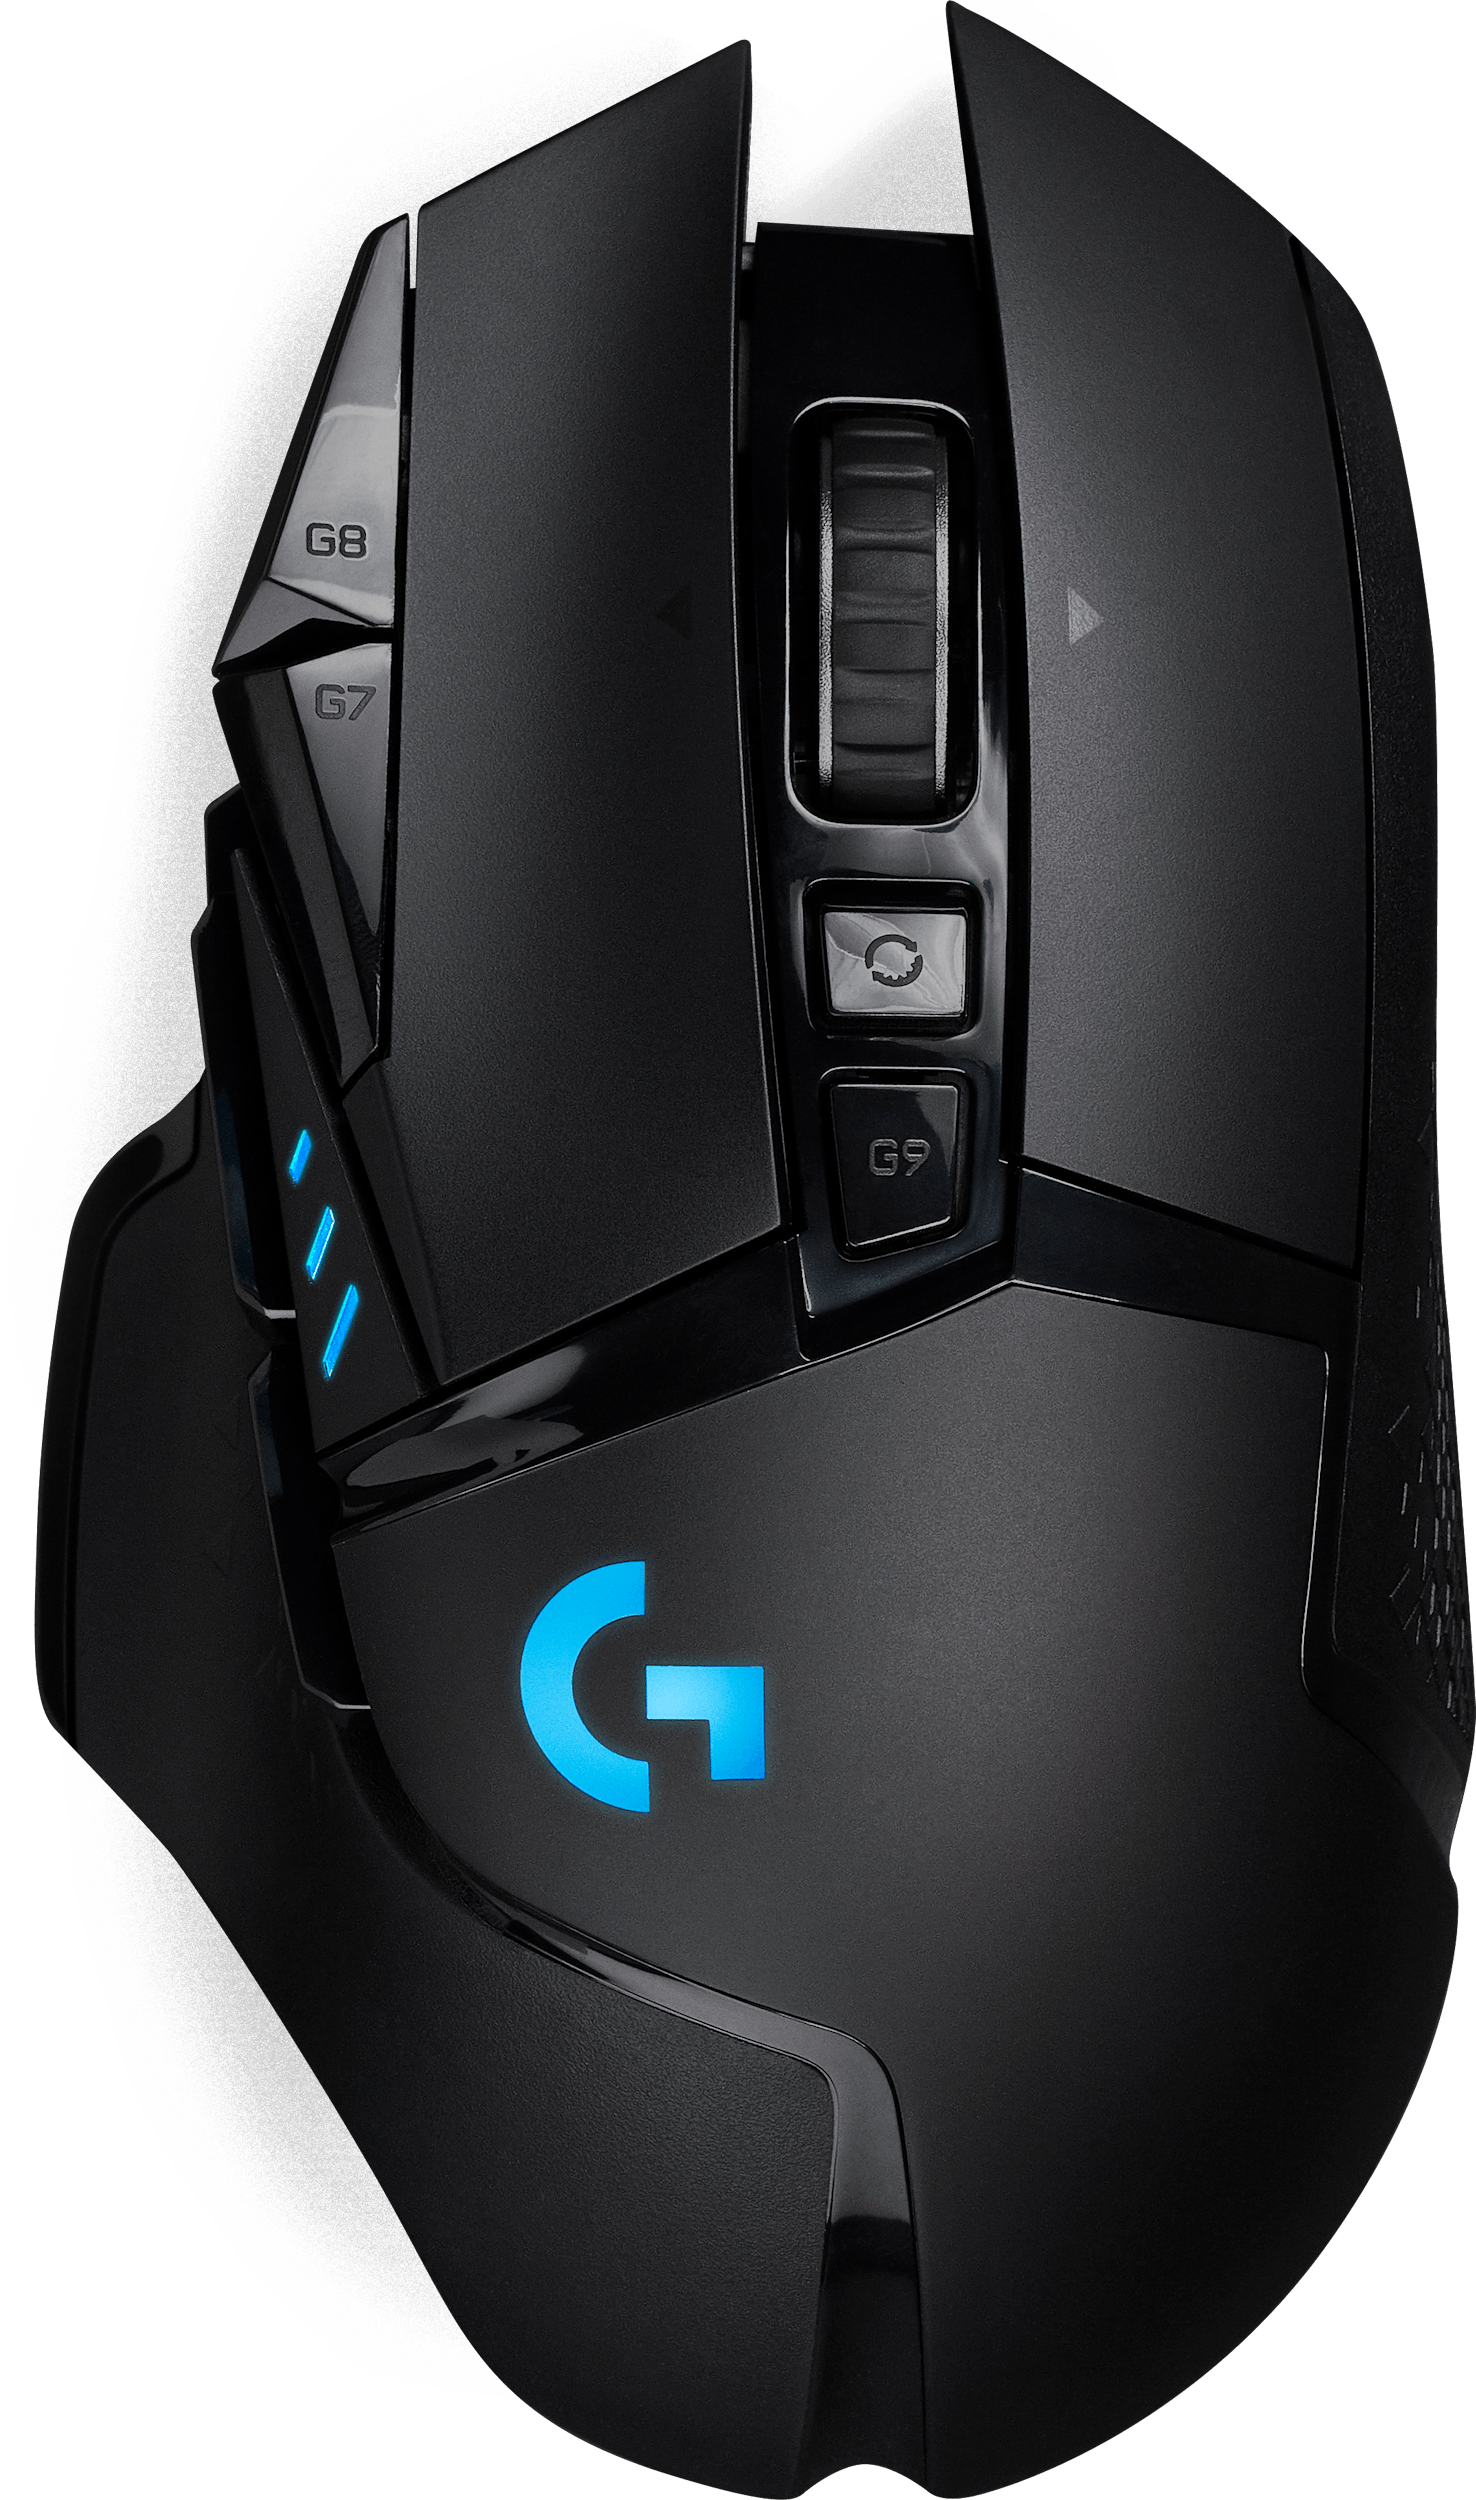 Logitech G502 Hero gets colorful new update